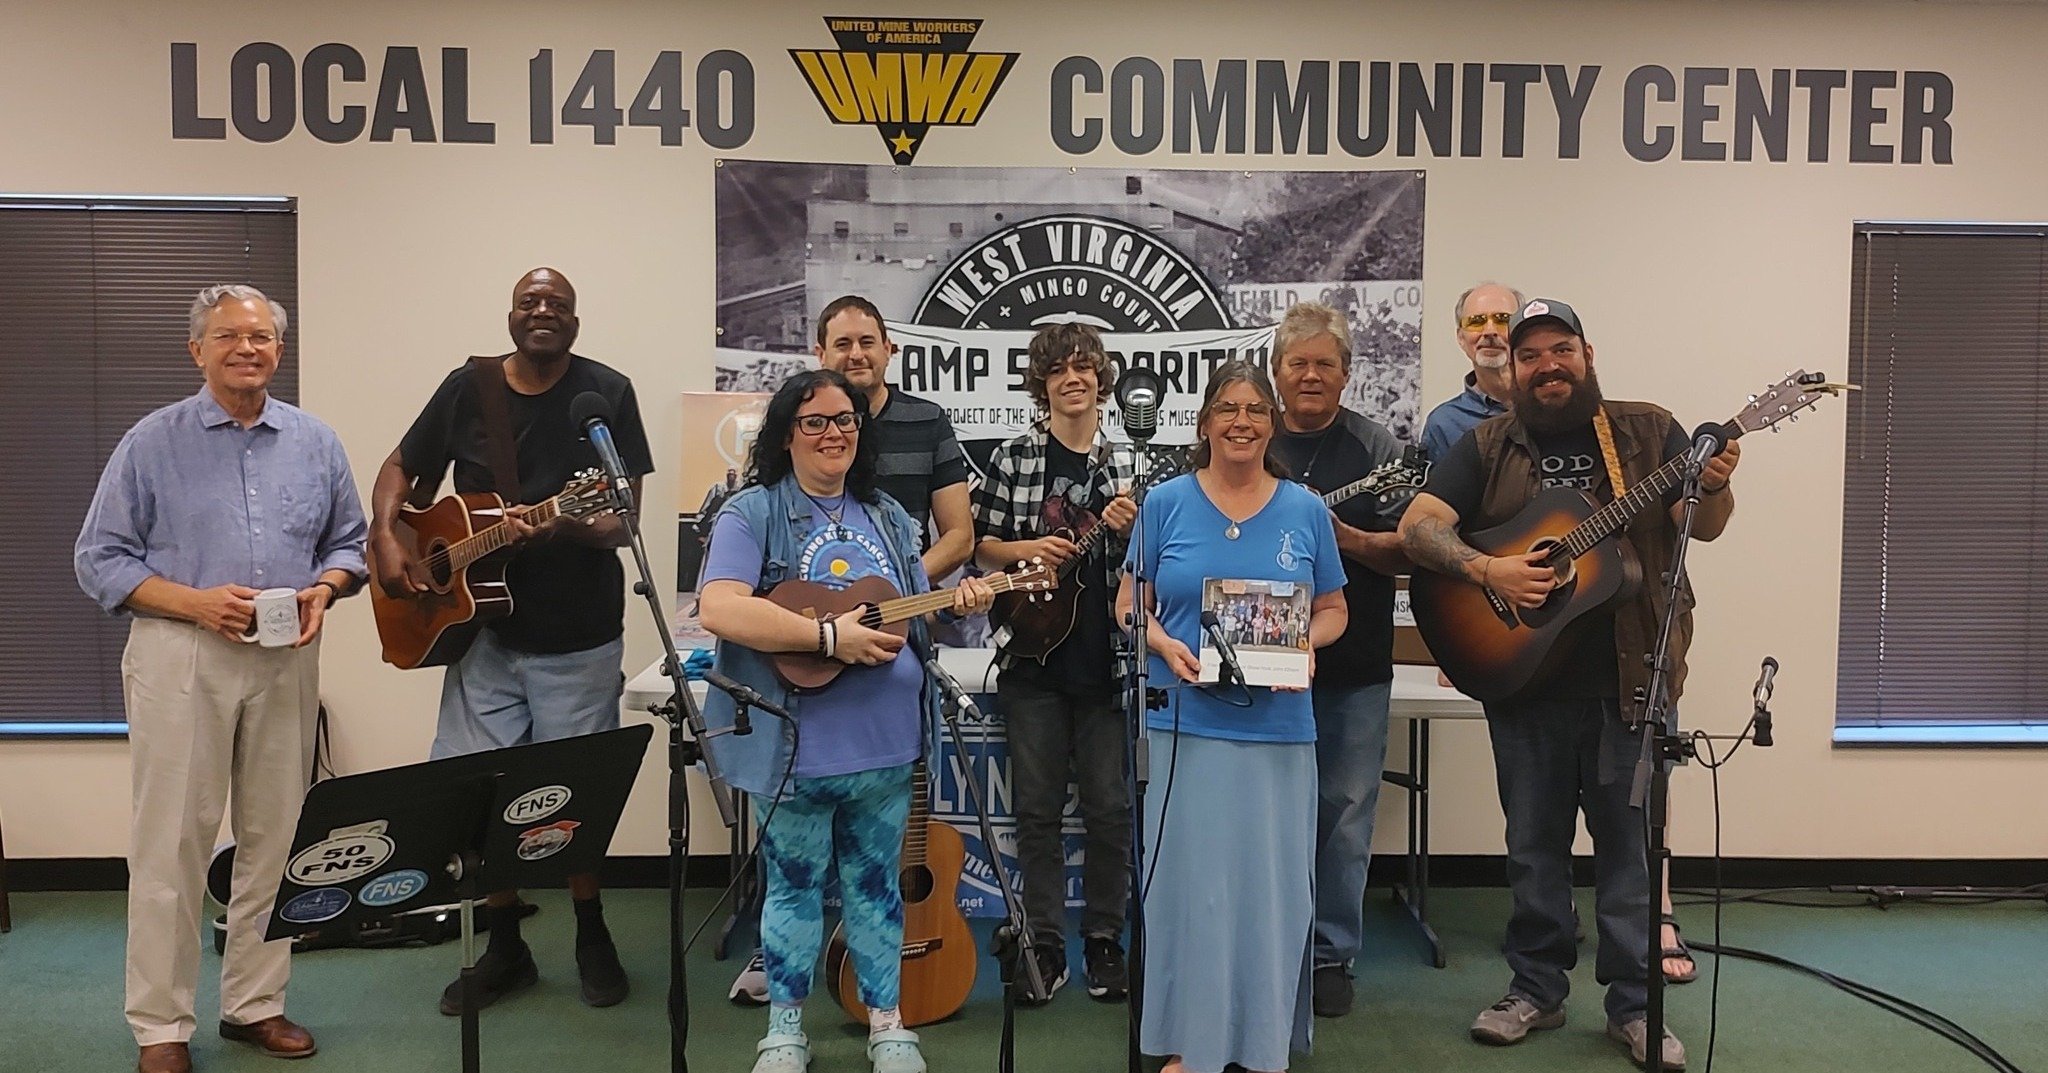 We had a great time yesterday welcoming The Wallace Horn Friendly Neighbor Show to the Town of Matewan, WV for a recording session in the community center. We had a blast hanging with John Ellison and the rest of the crew. It was great hearing so man